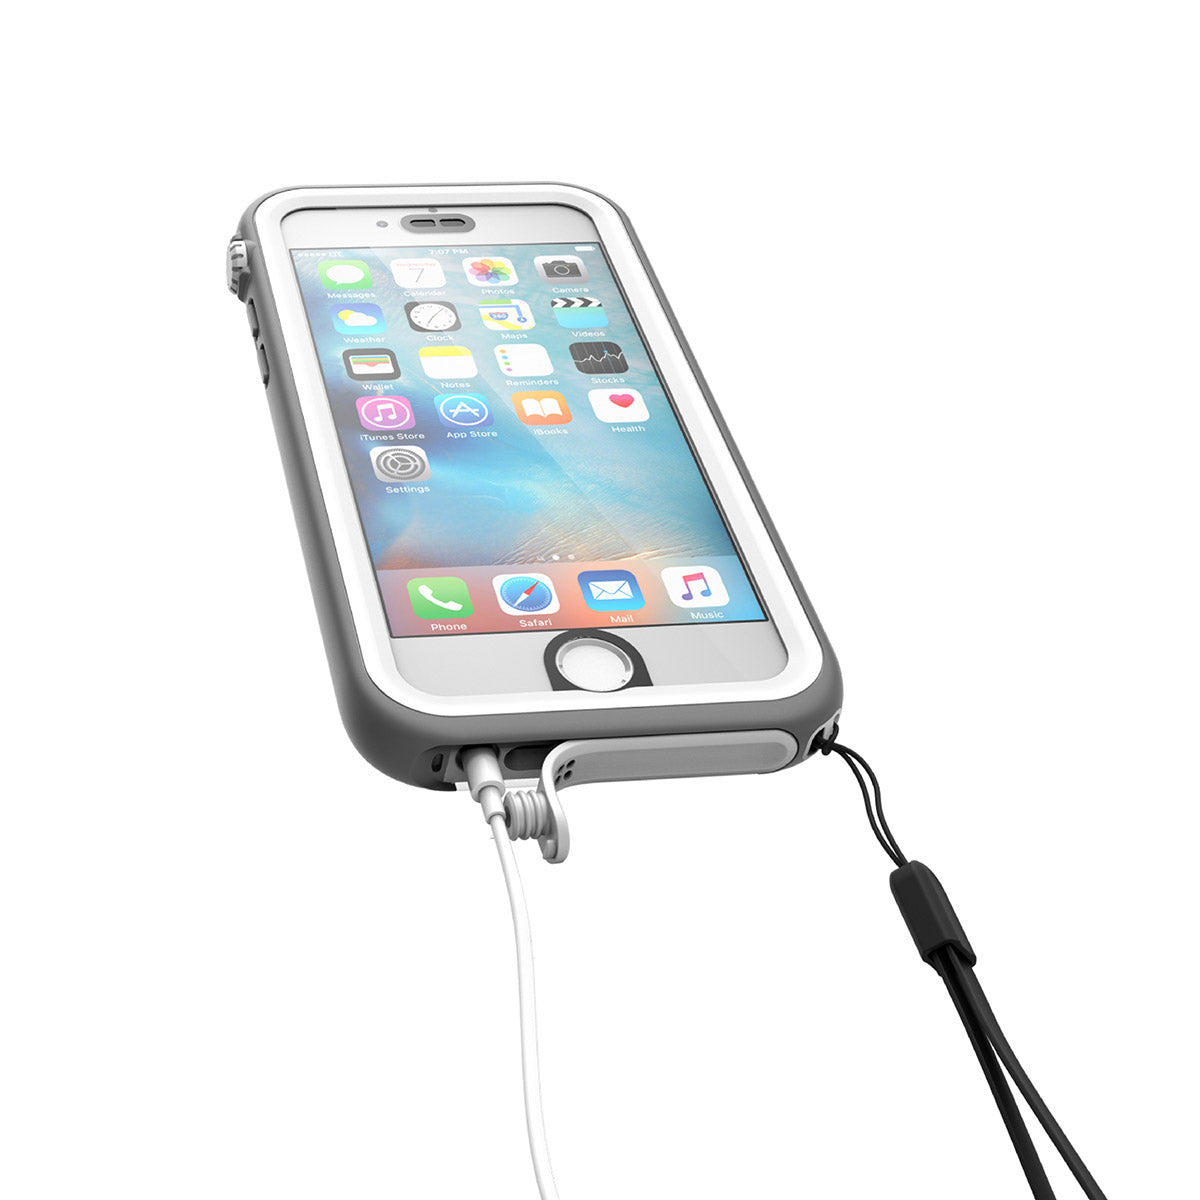 Catalyst iphone 6s waterproof case showing the case while charging in white&mist gray colorway